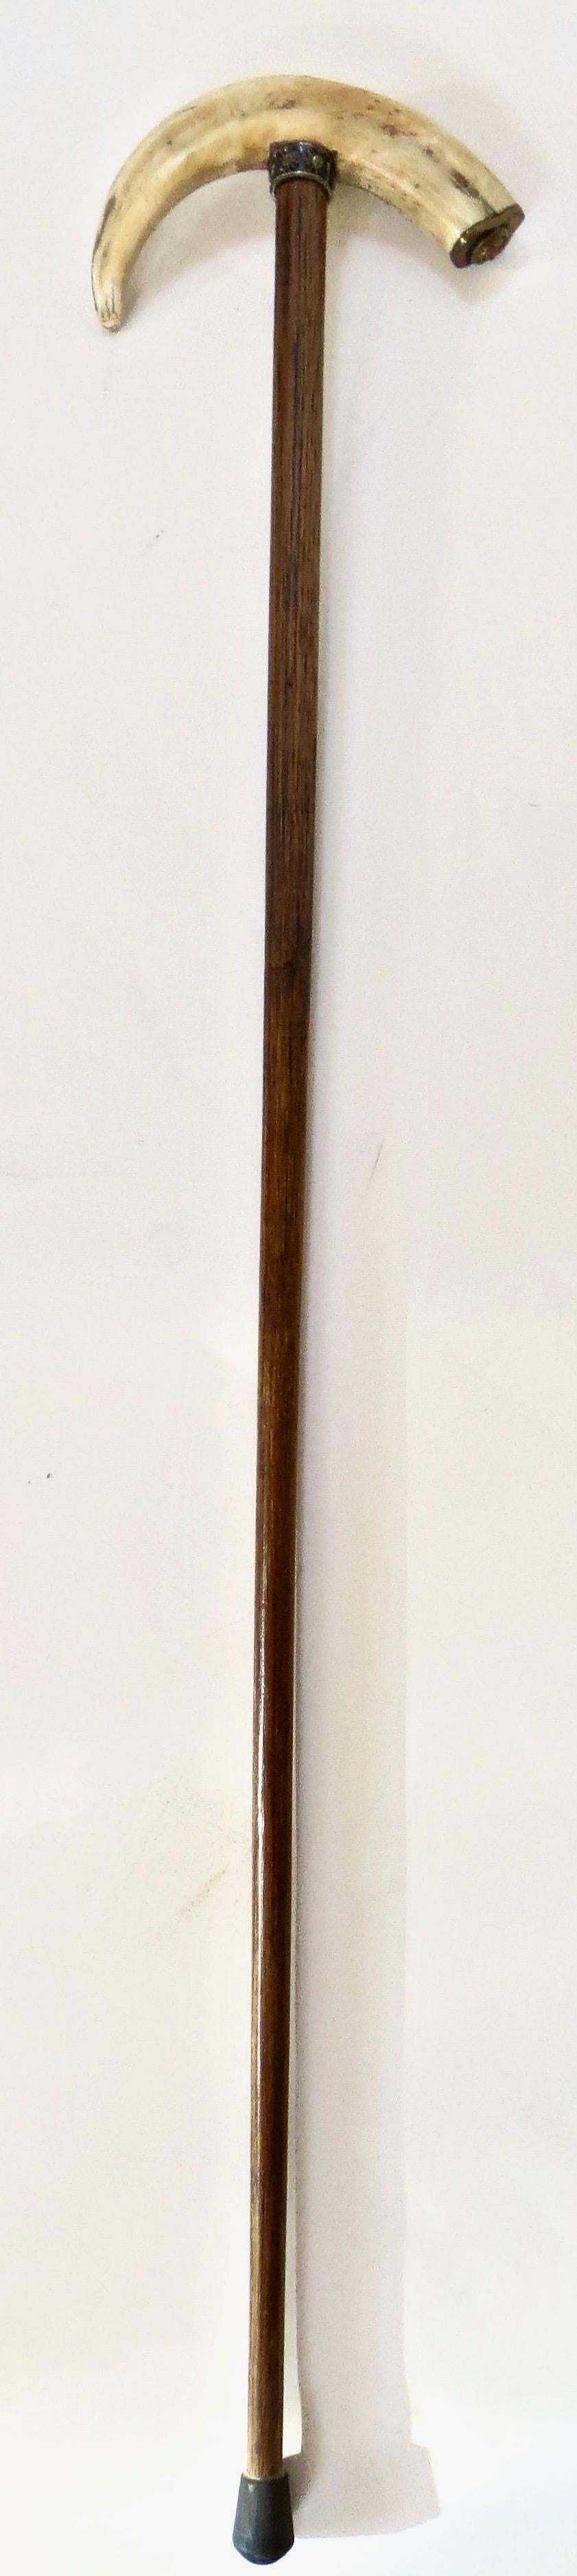 Nicely shaped boar's tusk handle provides for a nice grip on this 19th century American cane with hardwood (probably hickory) tapered stem. A silver plated 1/2